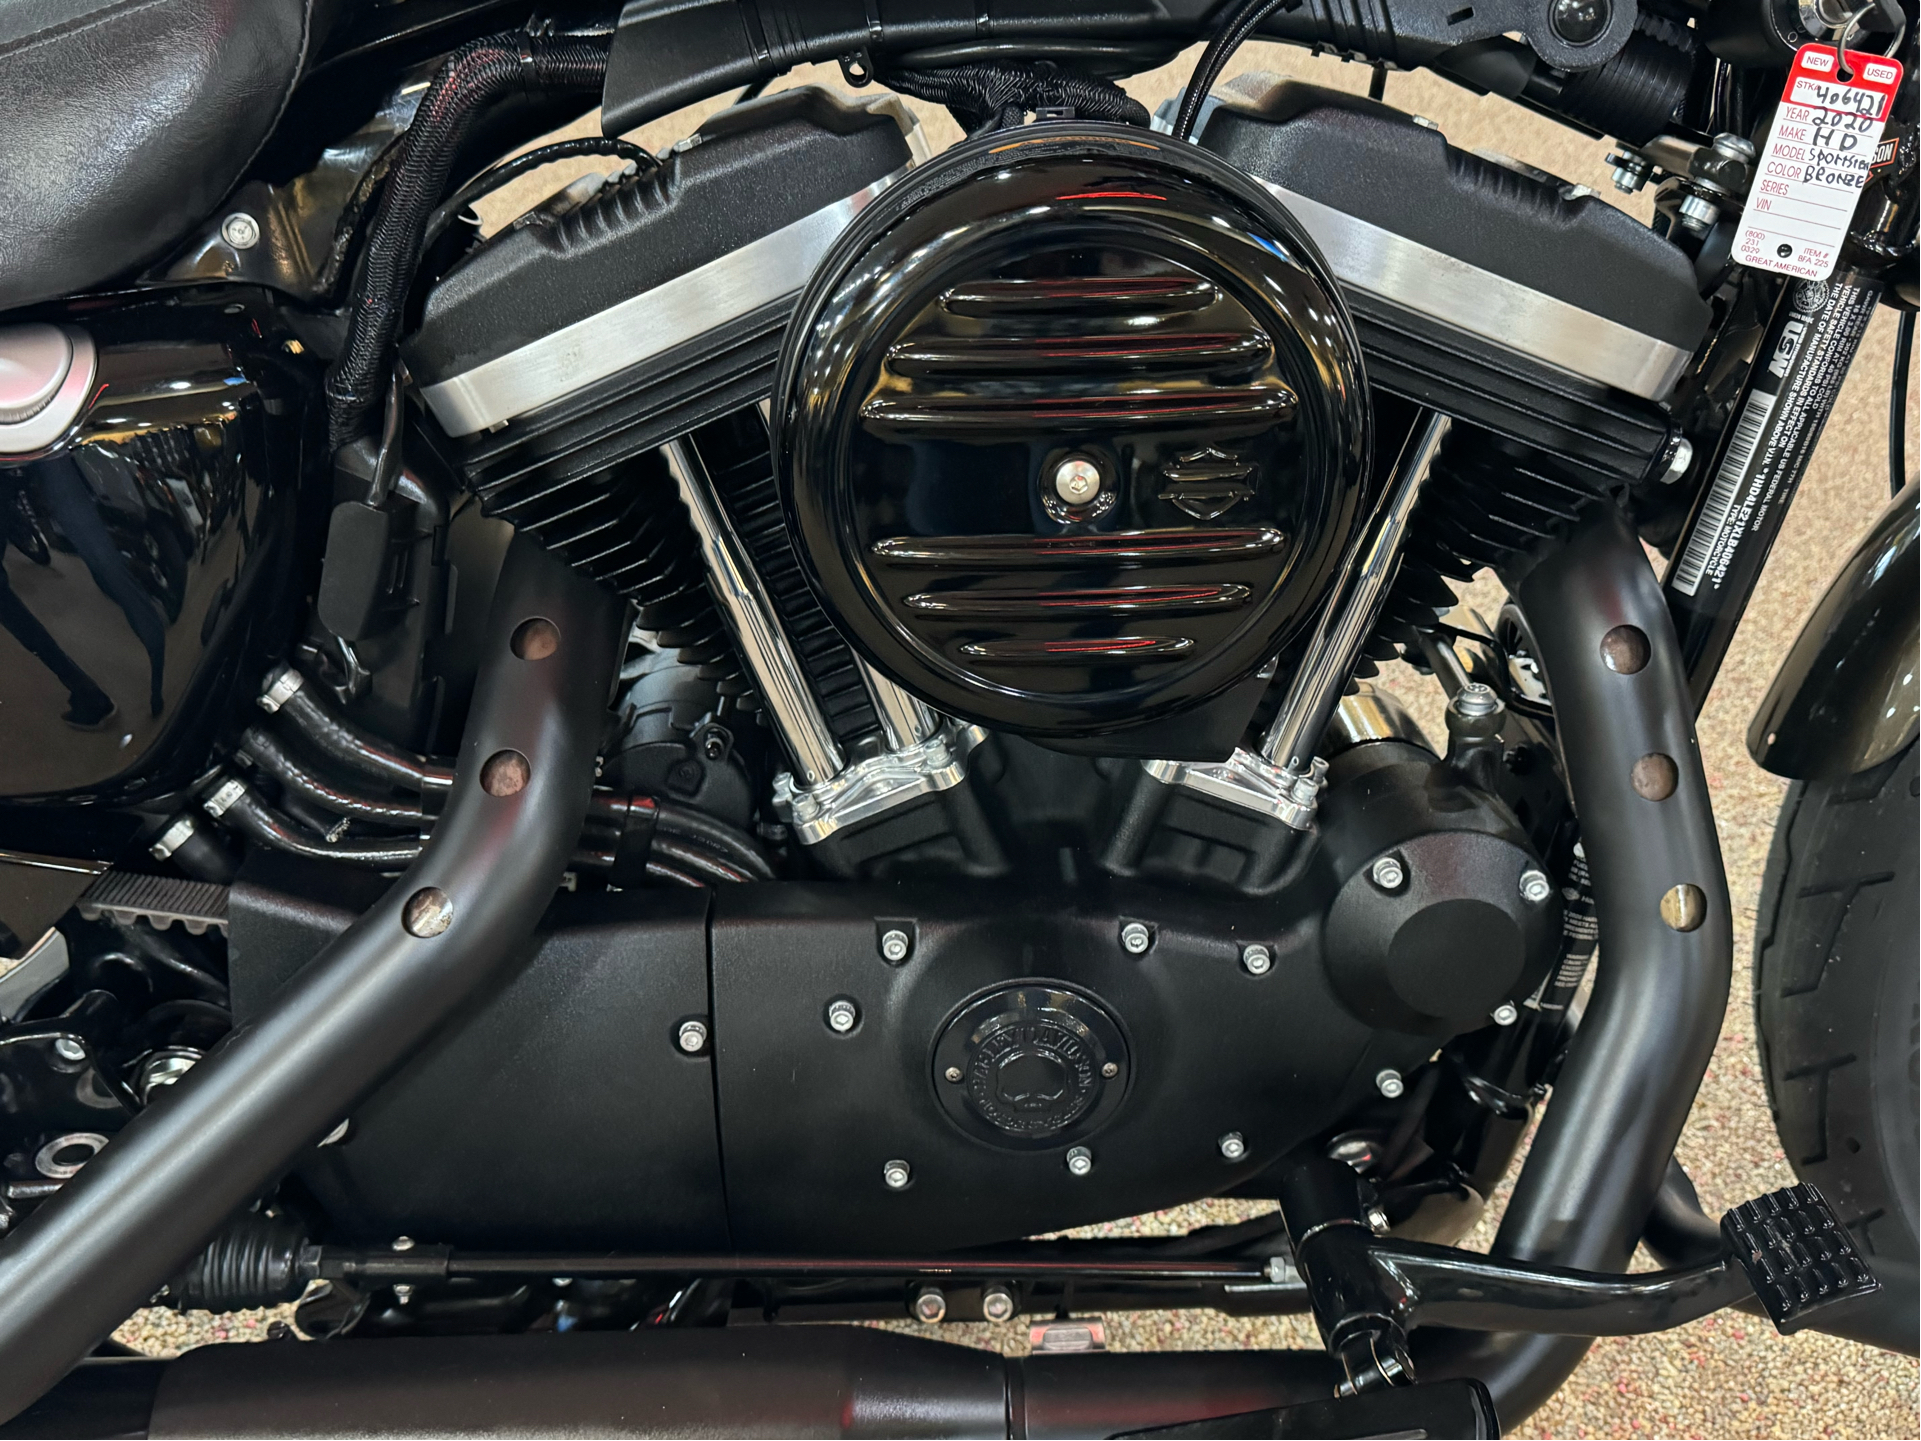 2020 Harley-Davidson Iron 883™ in Knoxville, Tennessee - Photo 7